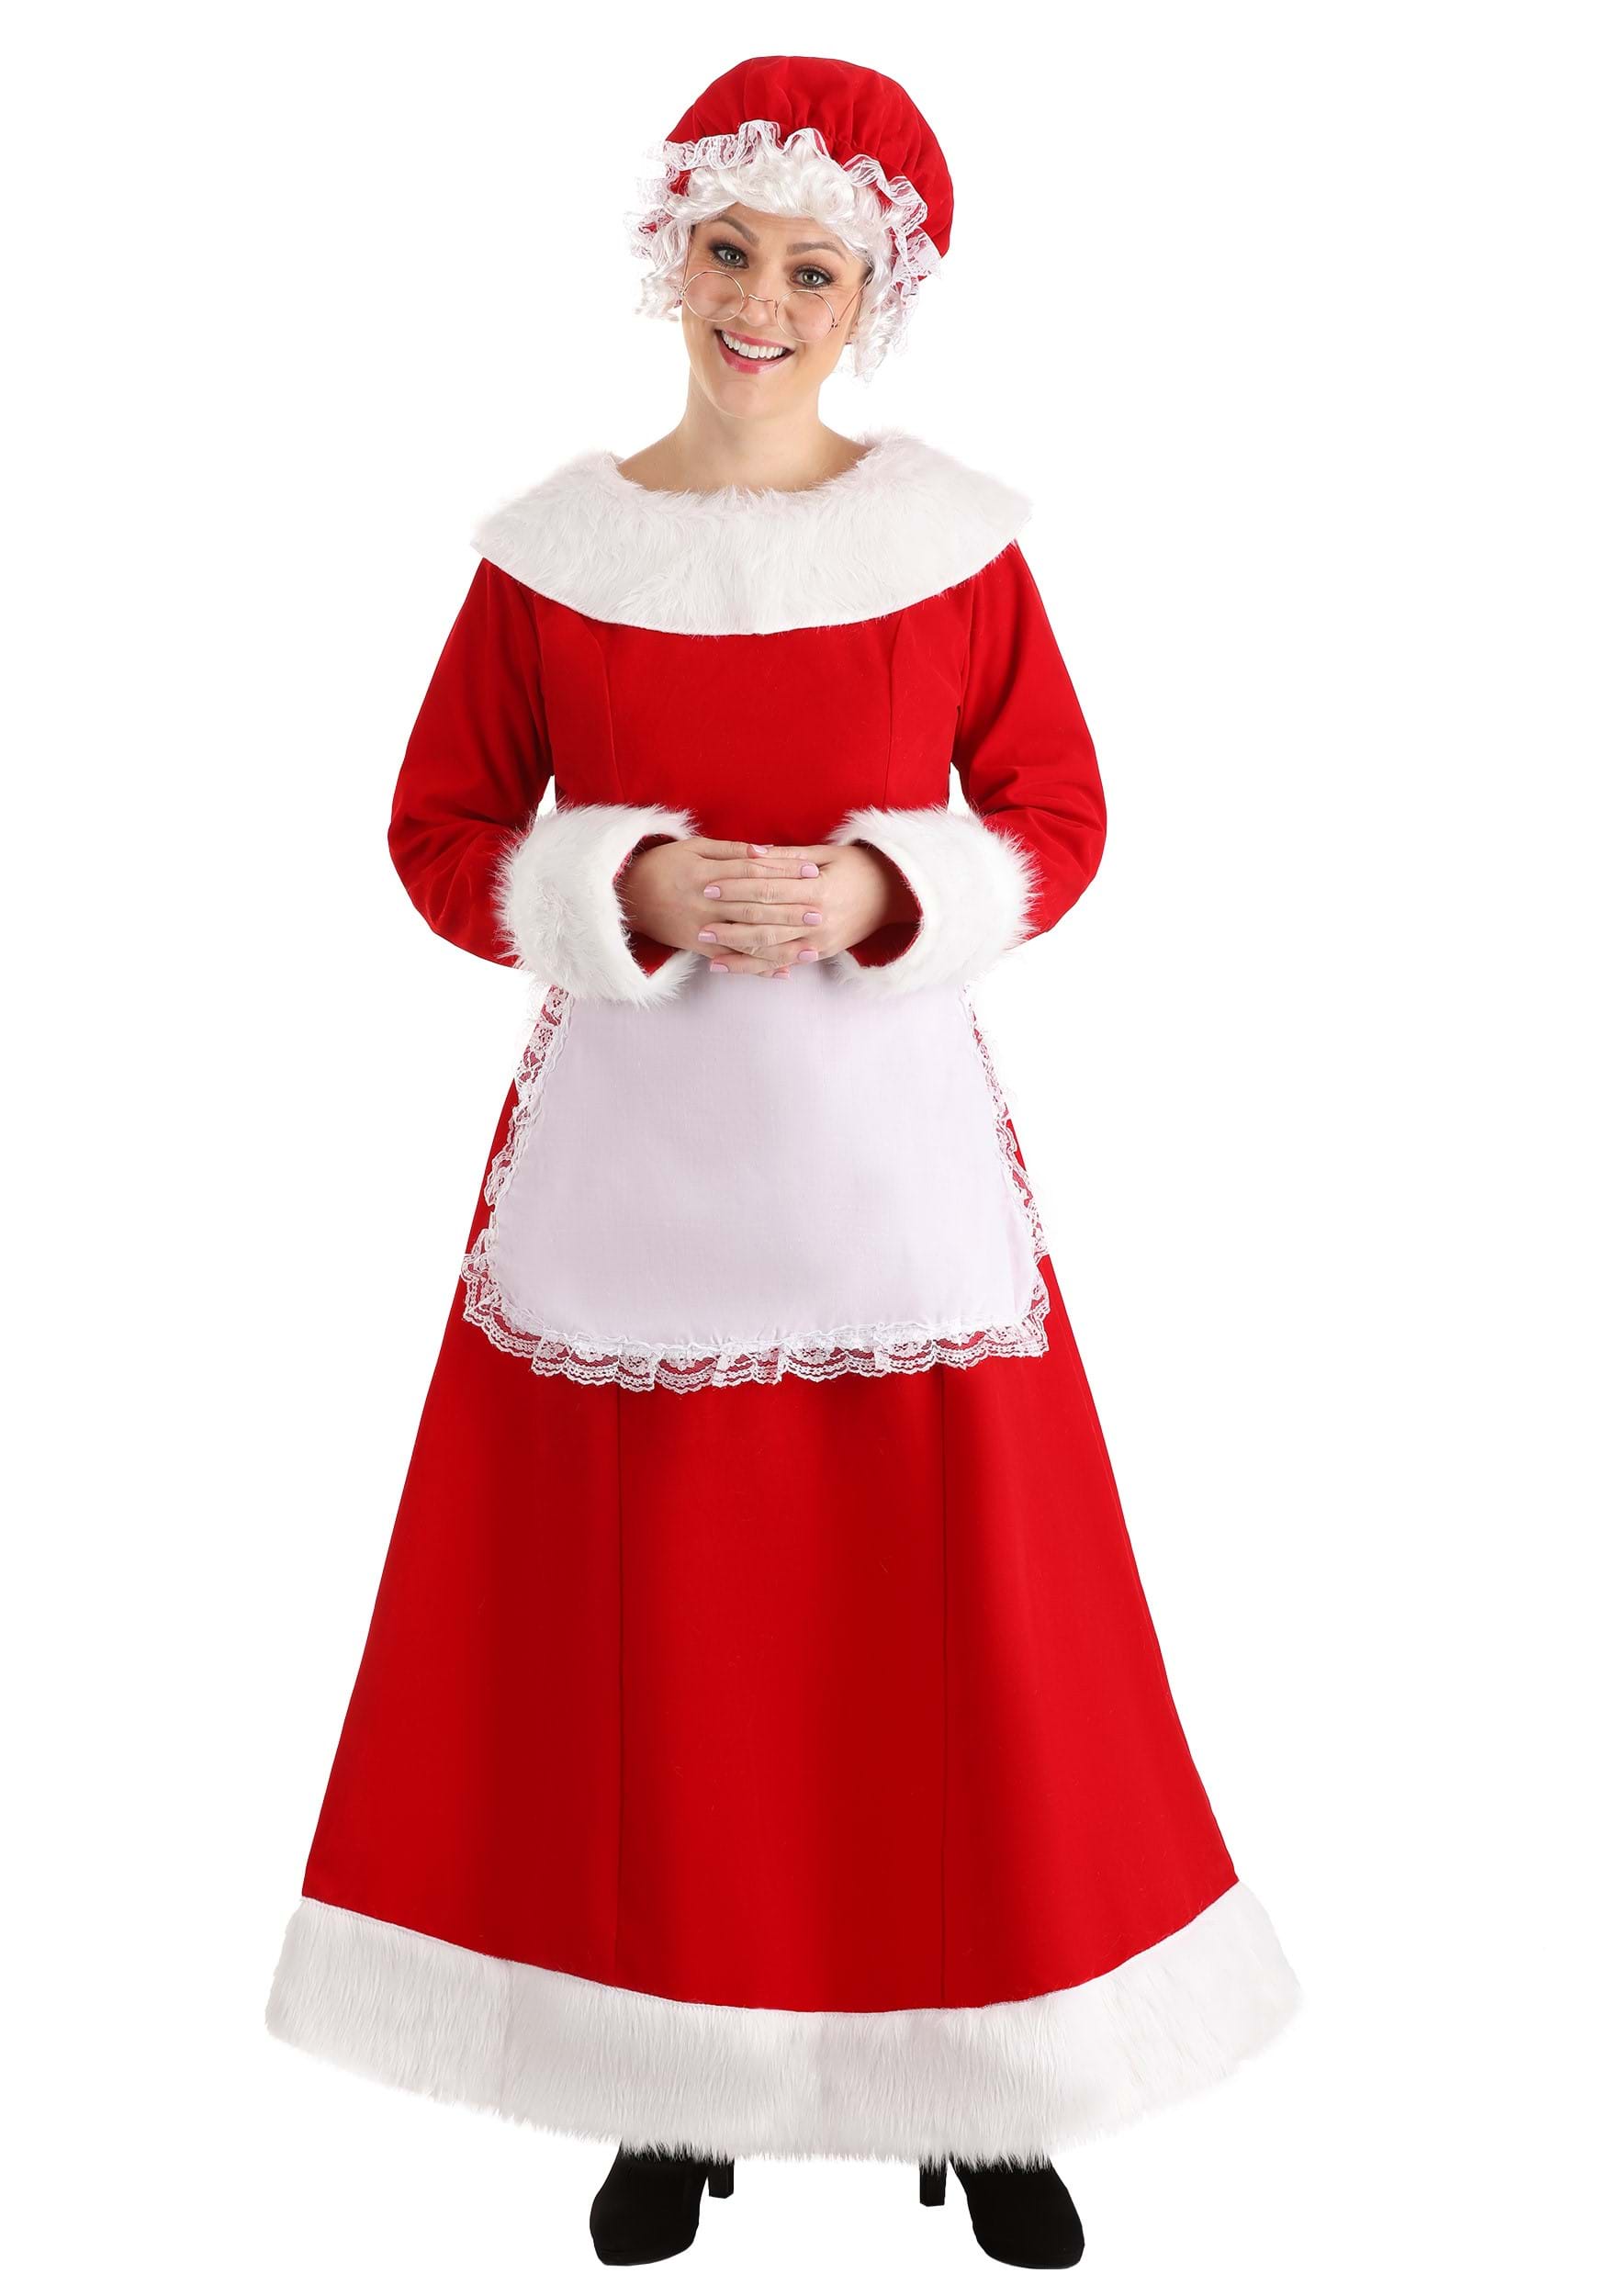 Photos - Fancy Dress Deluxe FUN Costumes Mrs. Claus  Costume for Women Red/White FUN2056AD 